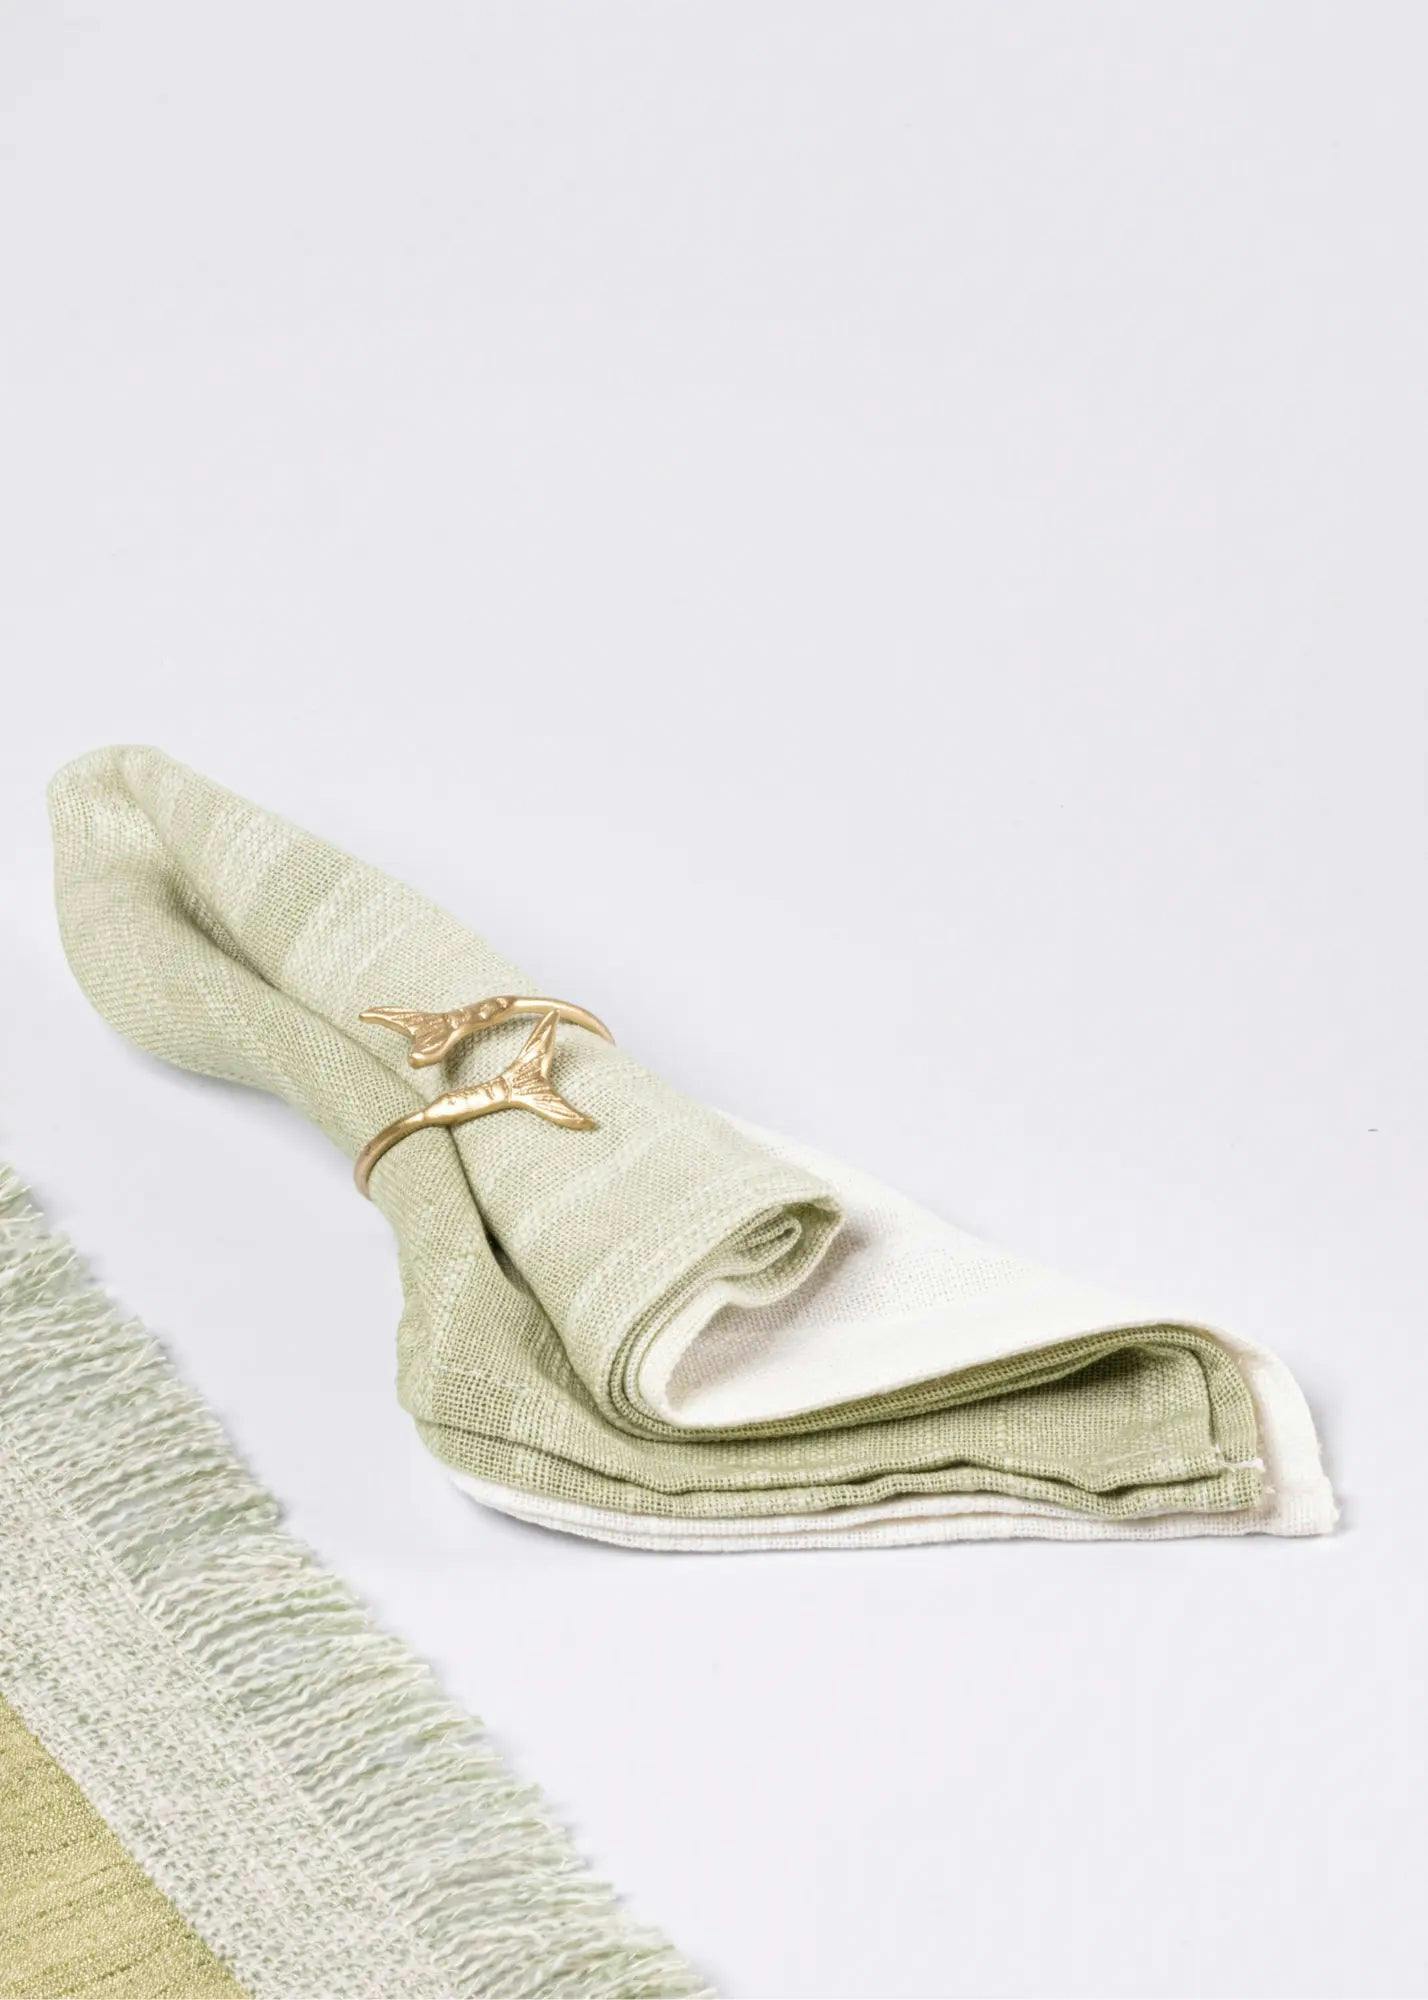 Thumbnail preview #0 for Mermaid Napkin Rings - Gold